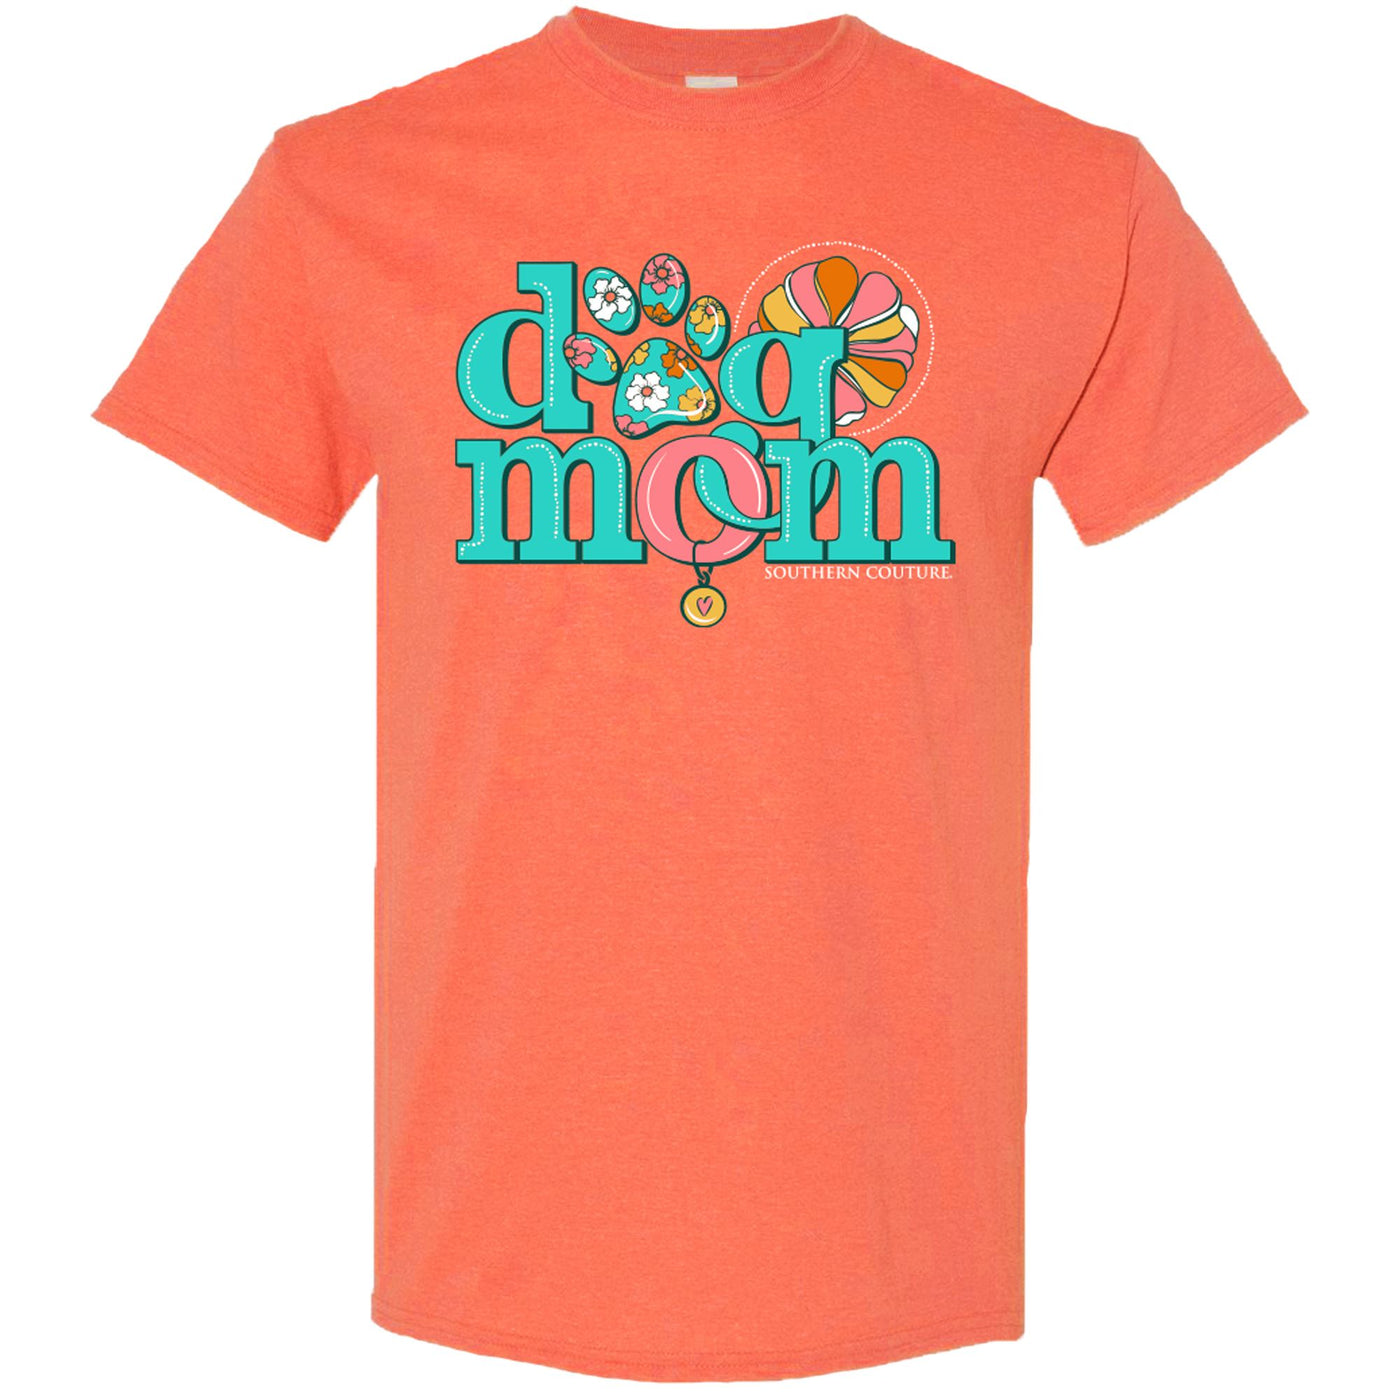 Southern Couture Dog Mom - Heather Orange